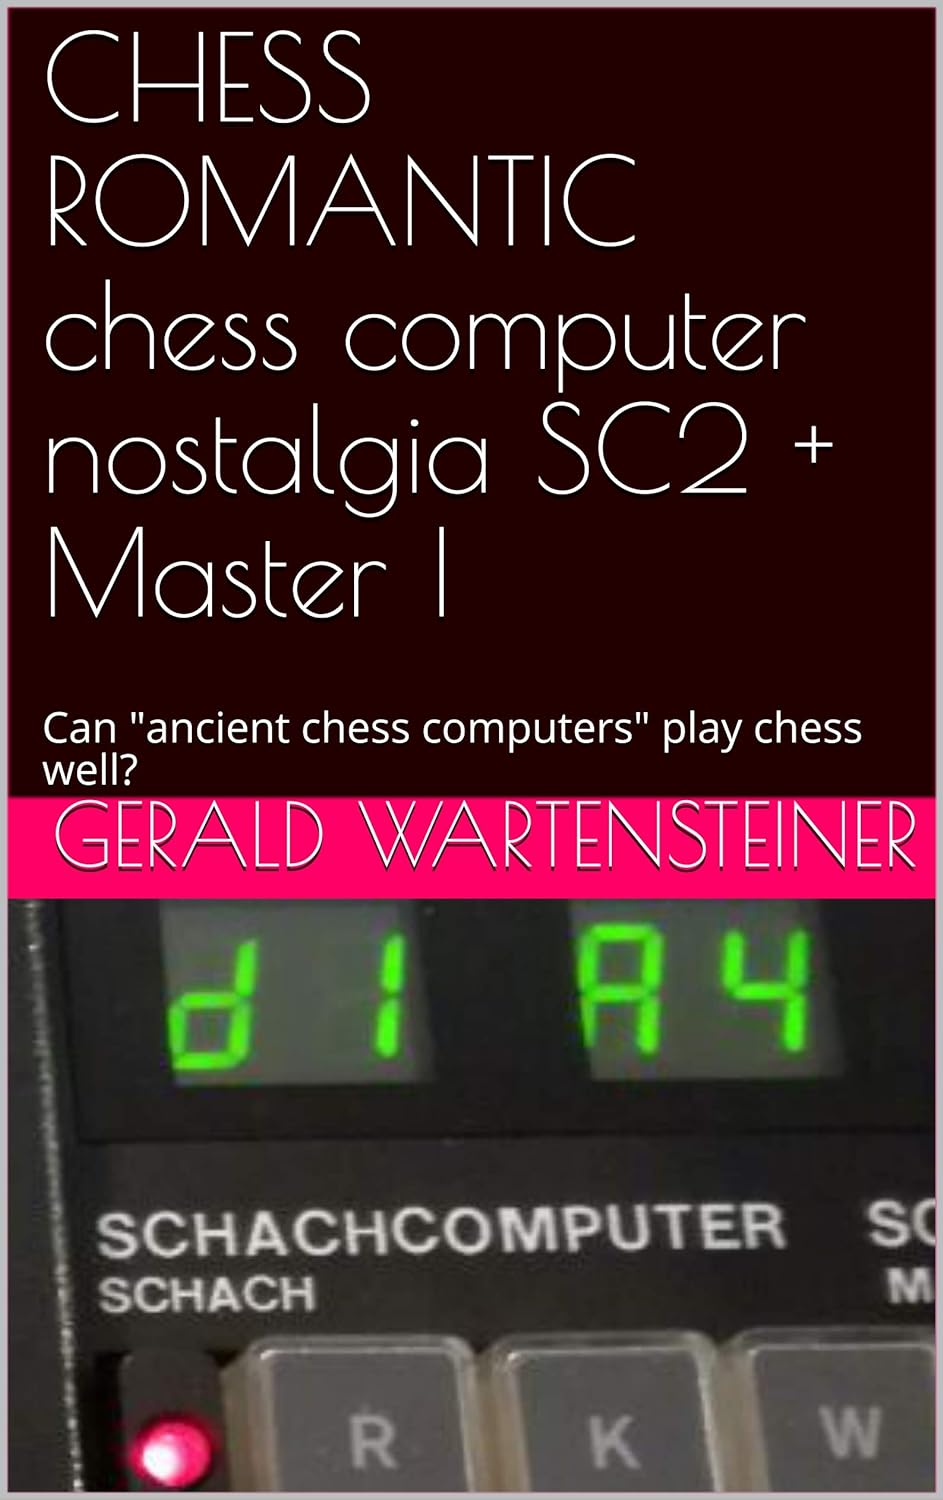 CHESS ROMANTIC chess computer nostalgia SC2 + Master I: Can "ancient chess computers" play chess well?